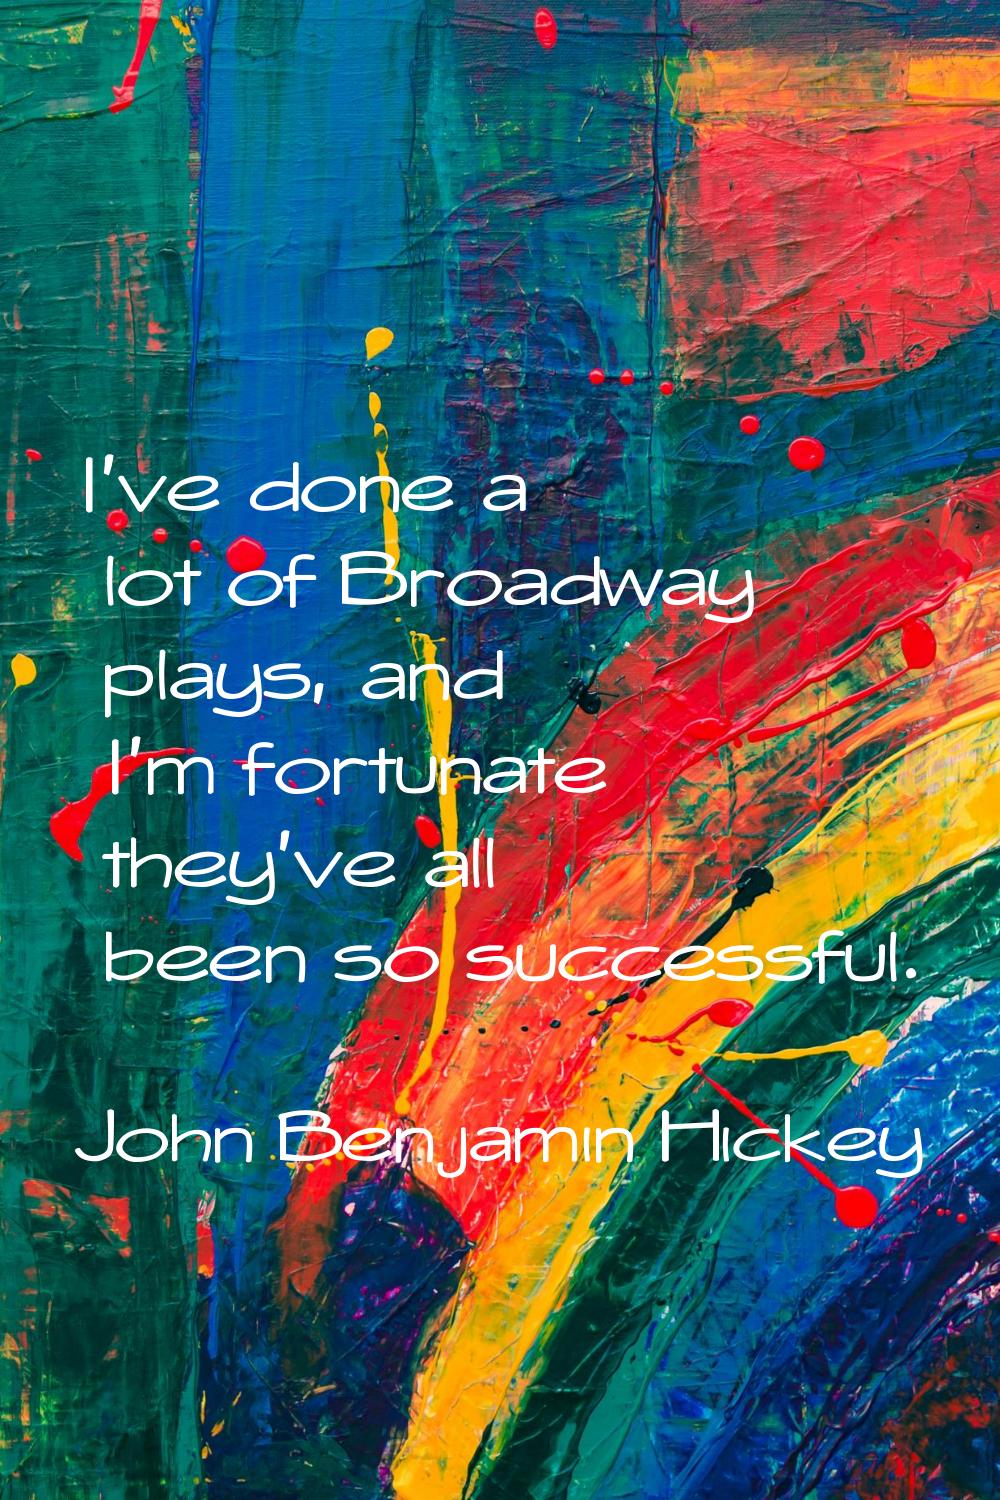 I've done a lot of Broadway plays, and I'm fortunate they've all been so successful.